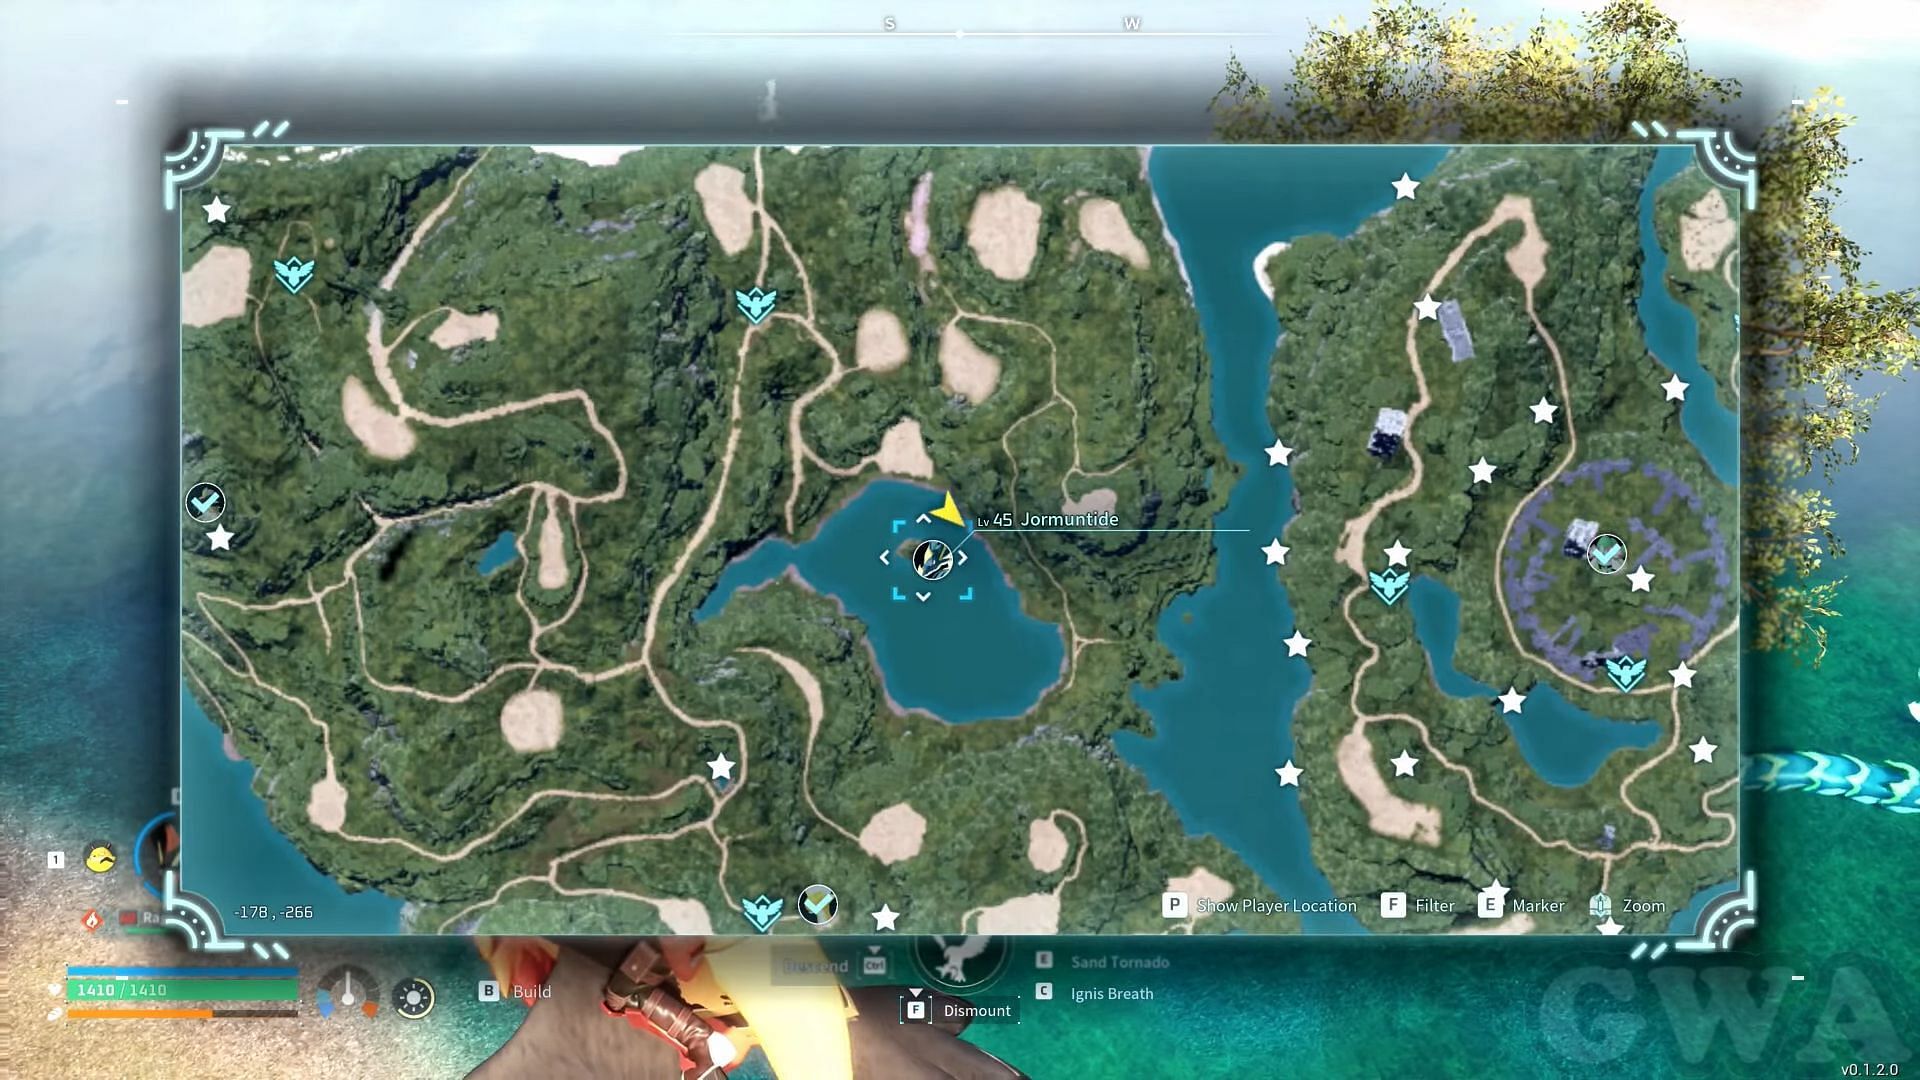 In-game screenshot for the spawn location of Jormuntide (Image via YouTube/Gaming with Abyss)